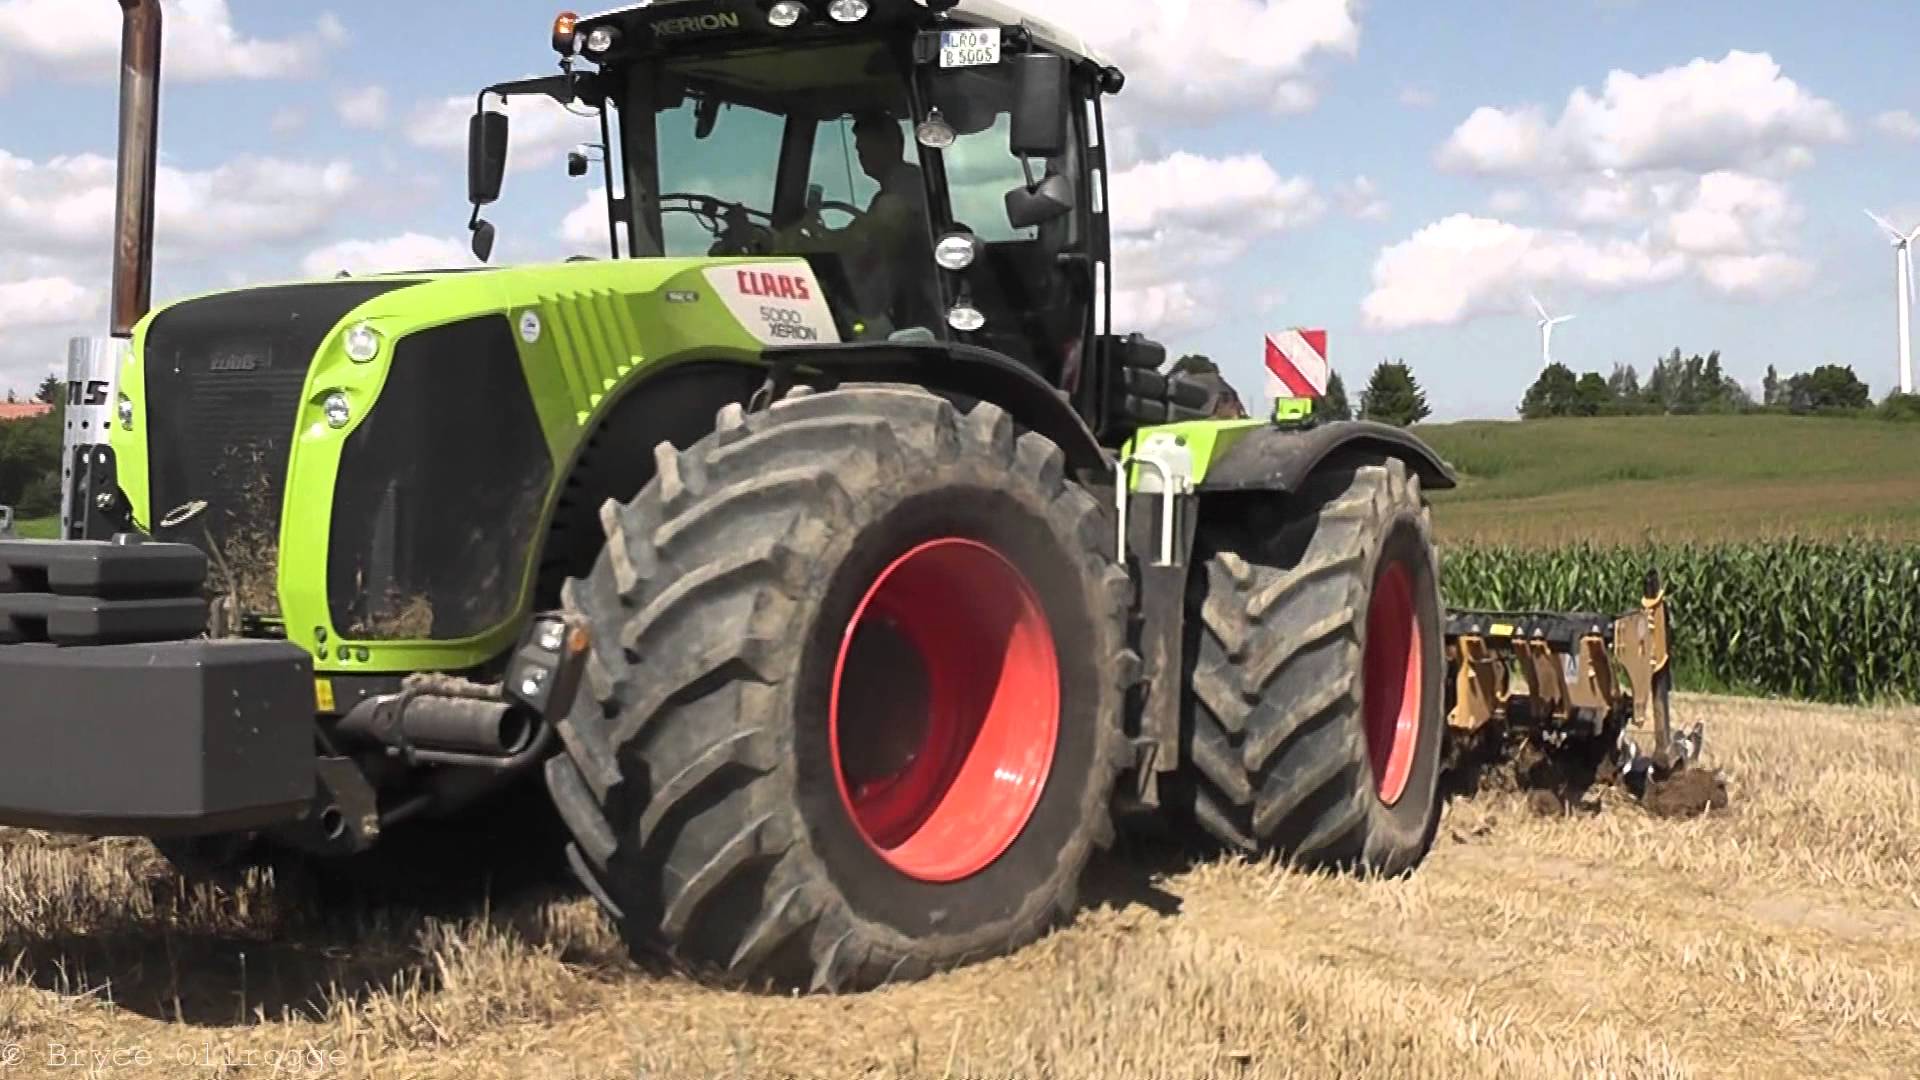 Uncut ] Claas Xerion 5000 mit ALPEGO Grubber - YouTube